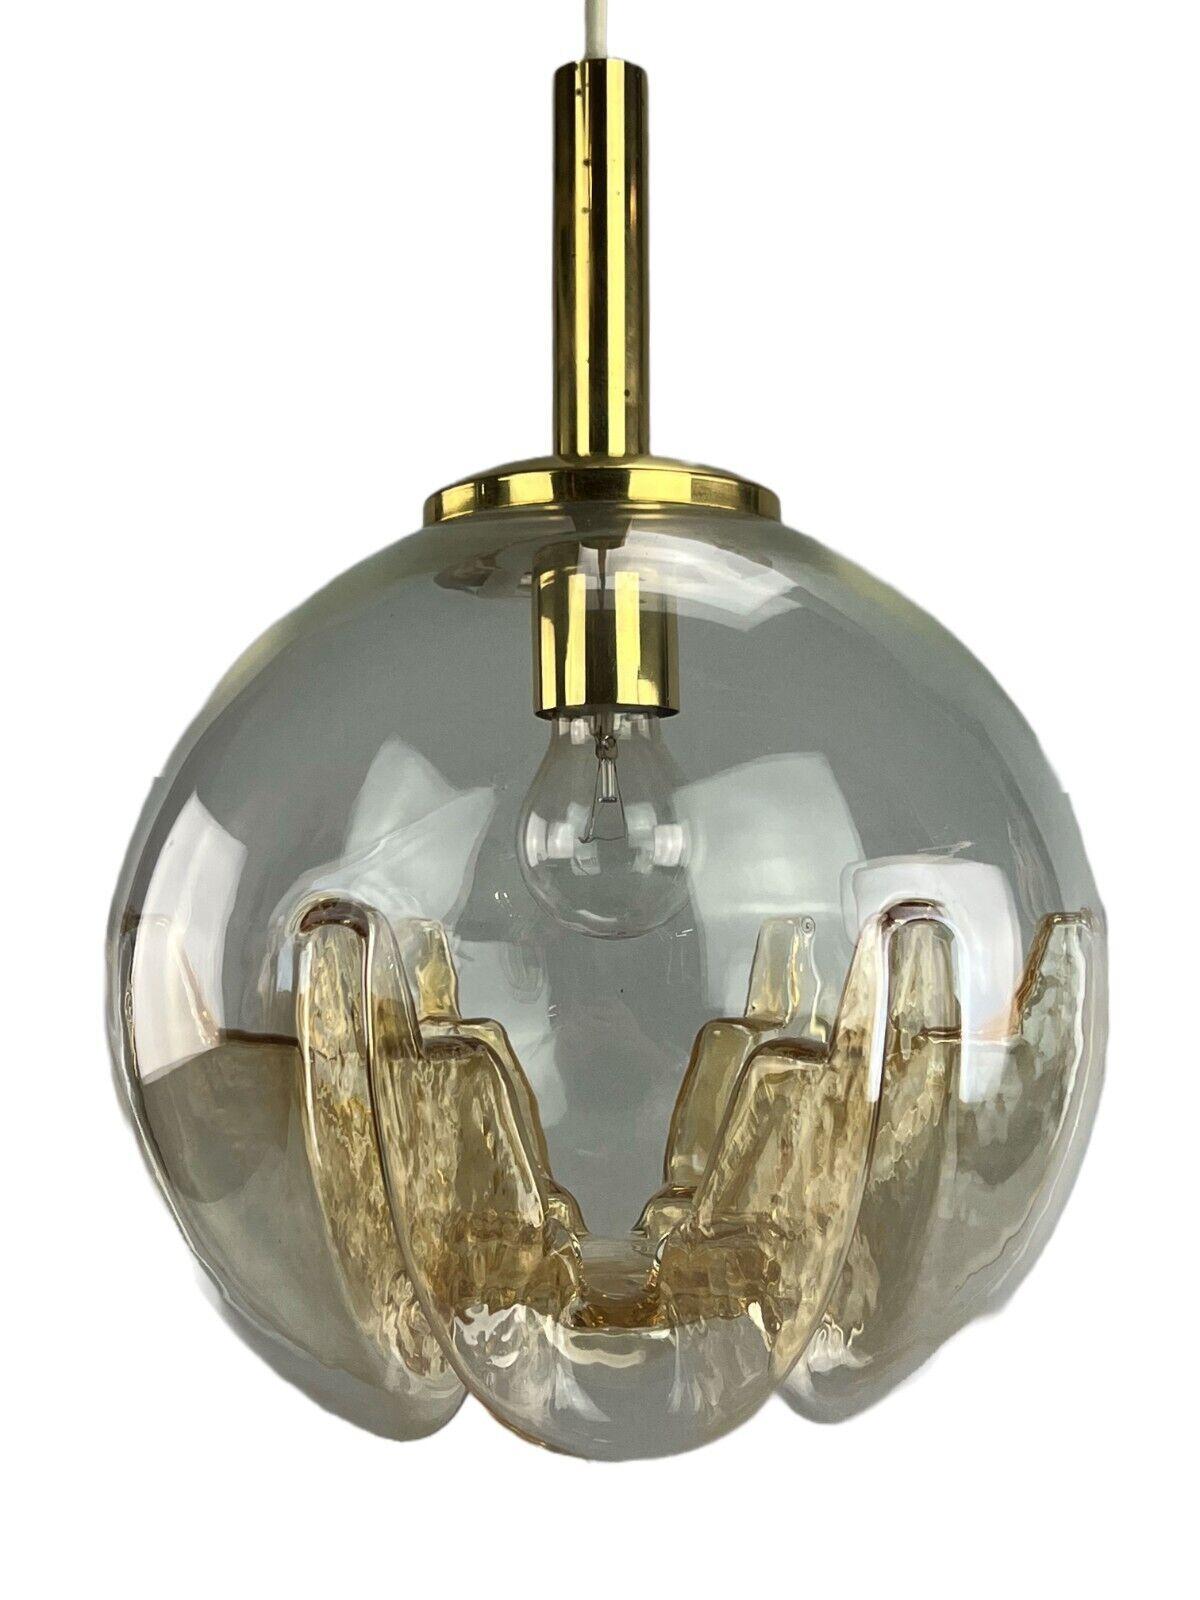 60s 70s Lamp light ceiling lamp hanging lamp Doria Glas Space Age Design

Object: hanging lamp

Manufacturer: Doria

Condition: good

Age: around 1960-1970

Dimensions:

Diameter = 30cm
Height = 40cm

Other notes:

The pictures